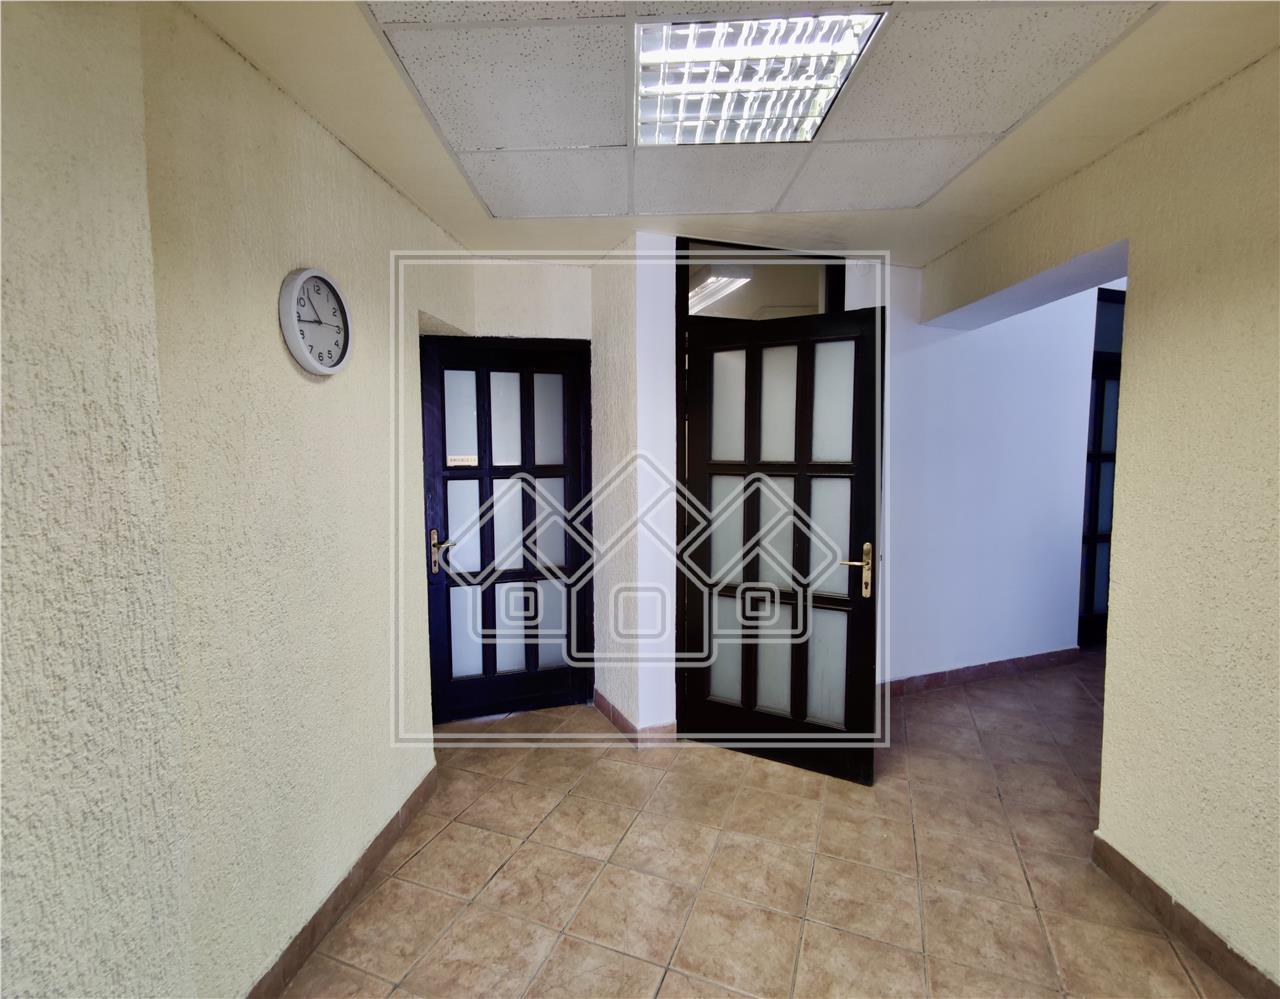 Office space for sale in Sibiu - with separate entrance